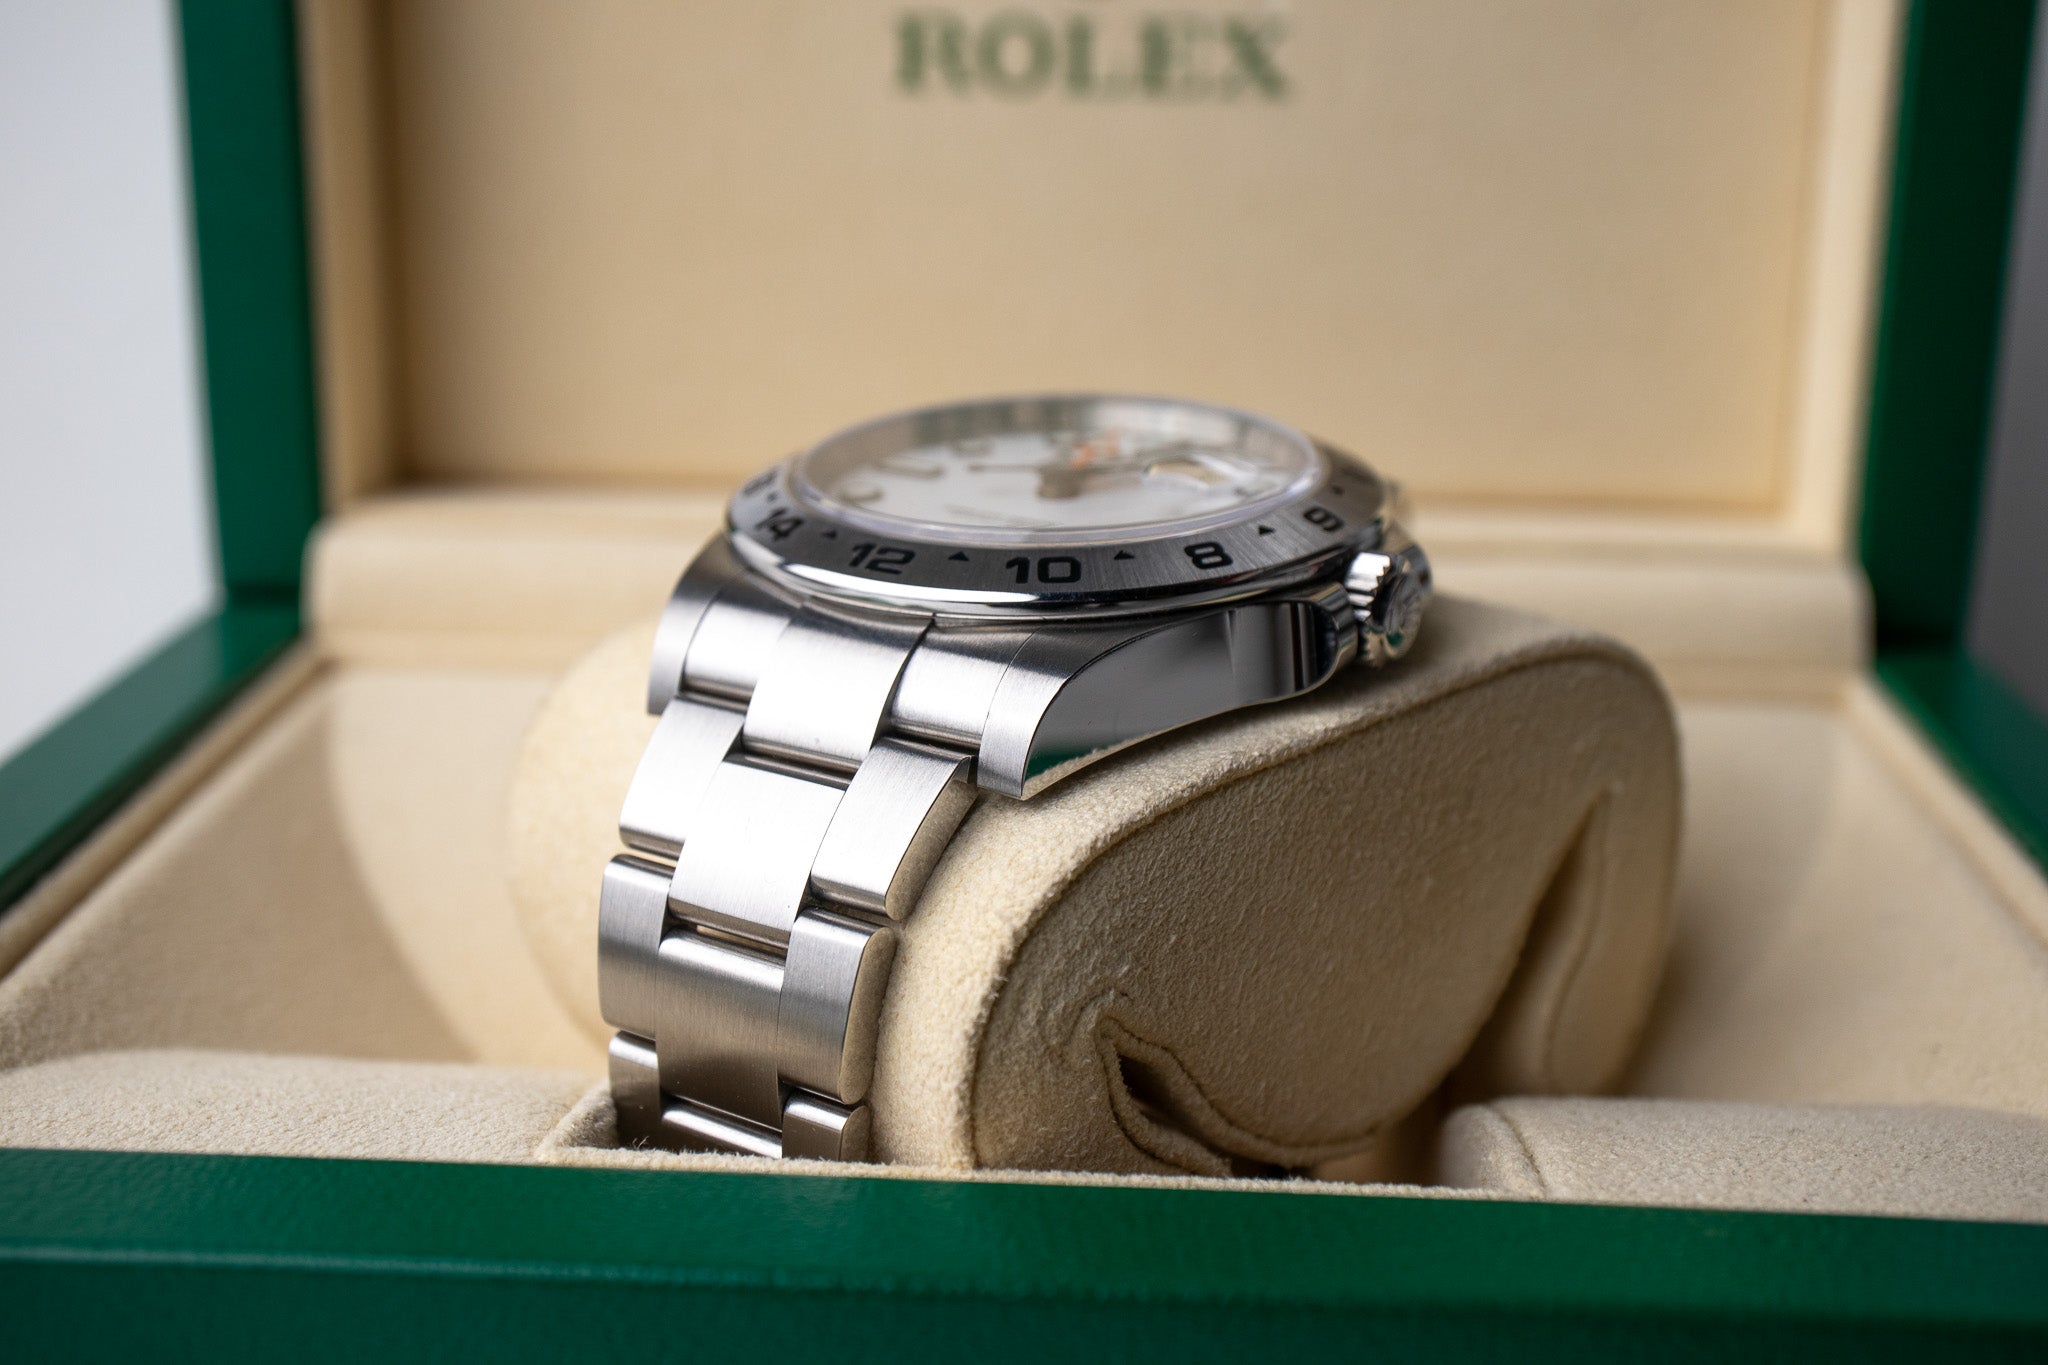 Rolex Explorer II reference 16570 bottom right side of the case and lug with the crown